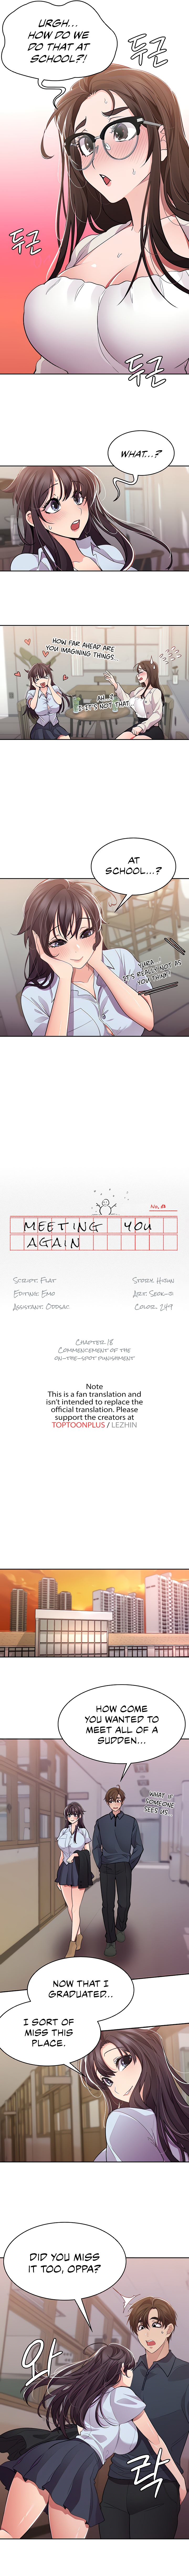 Meeting You Again - Page 3